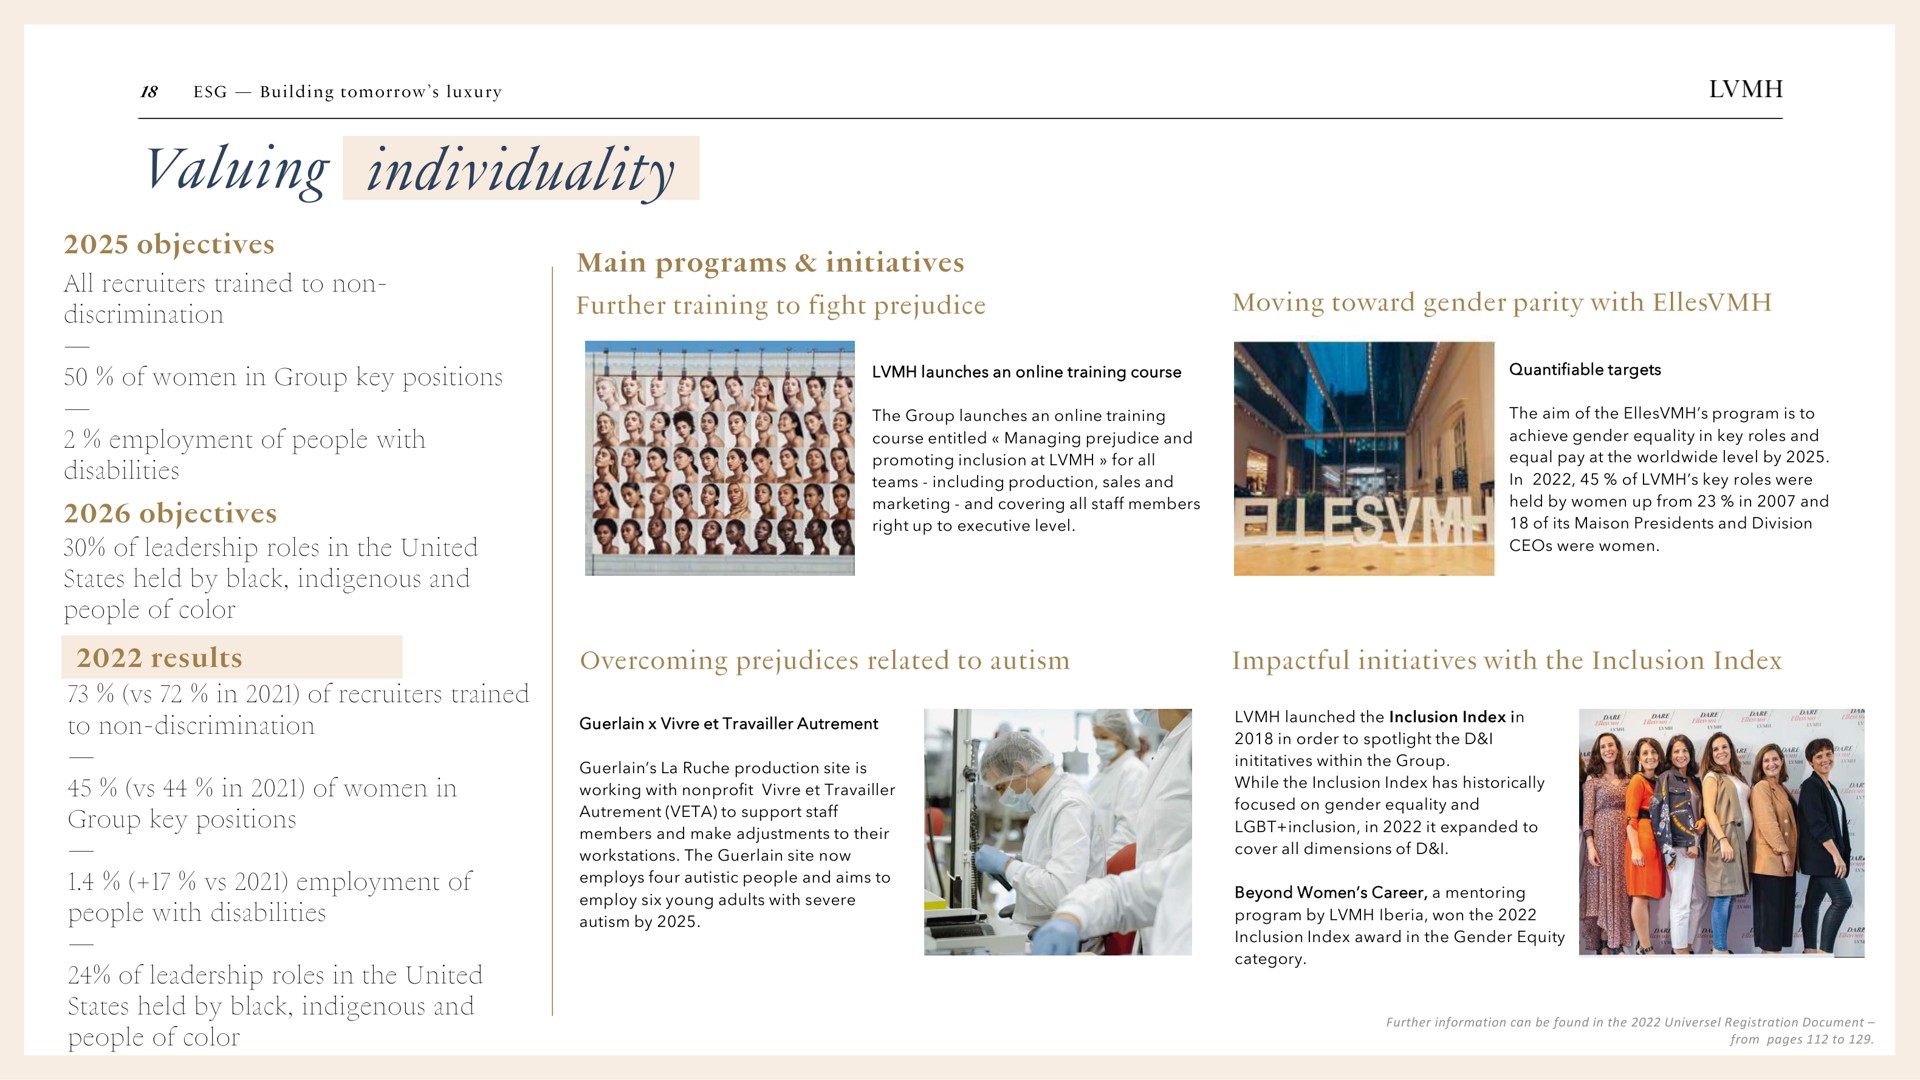 valuing individuality | LVMH